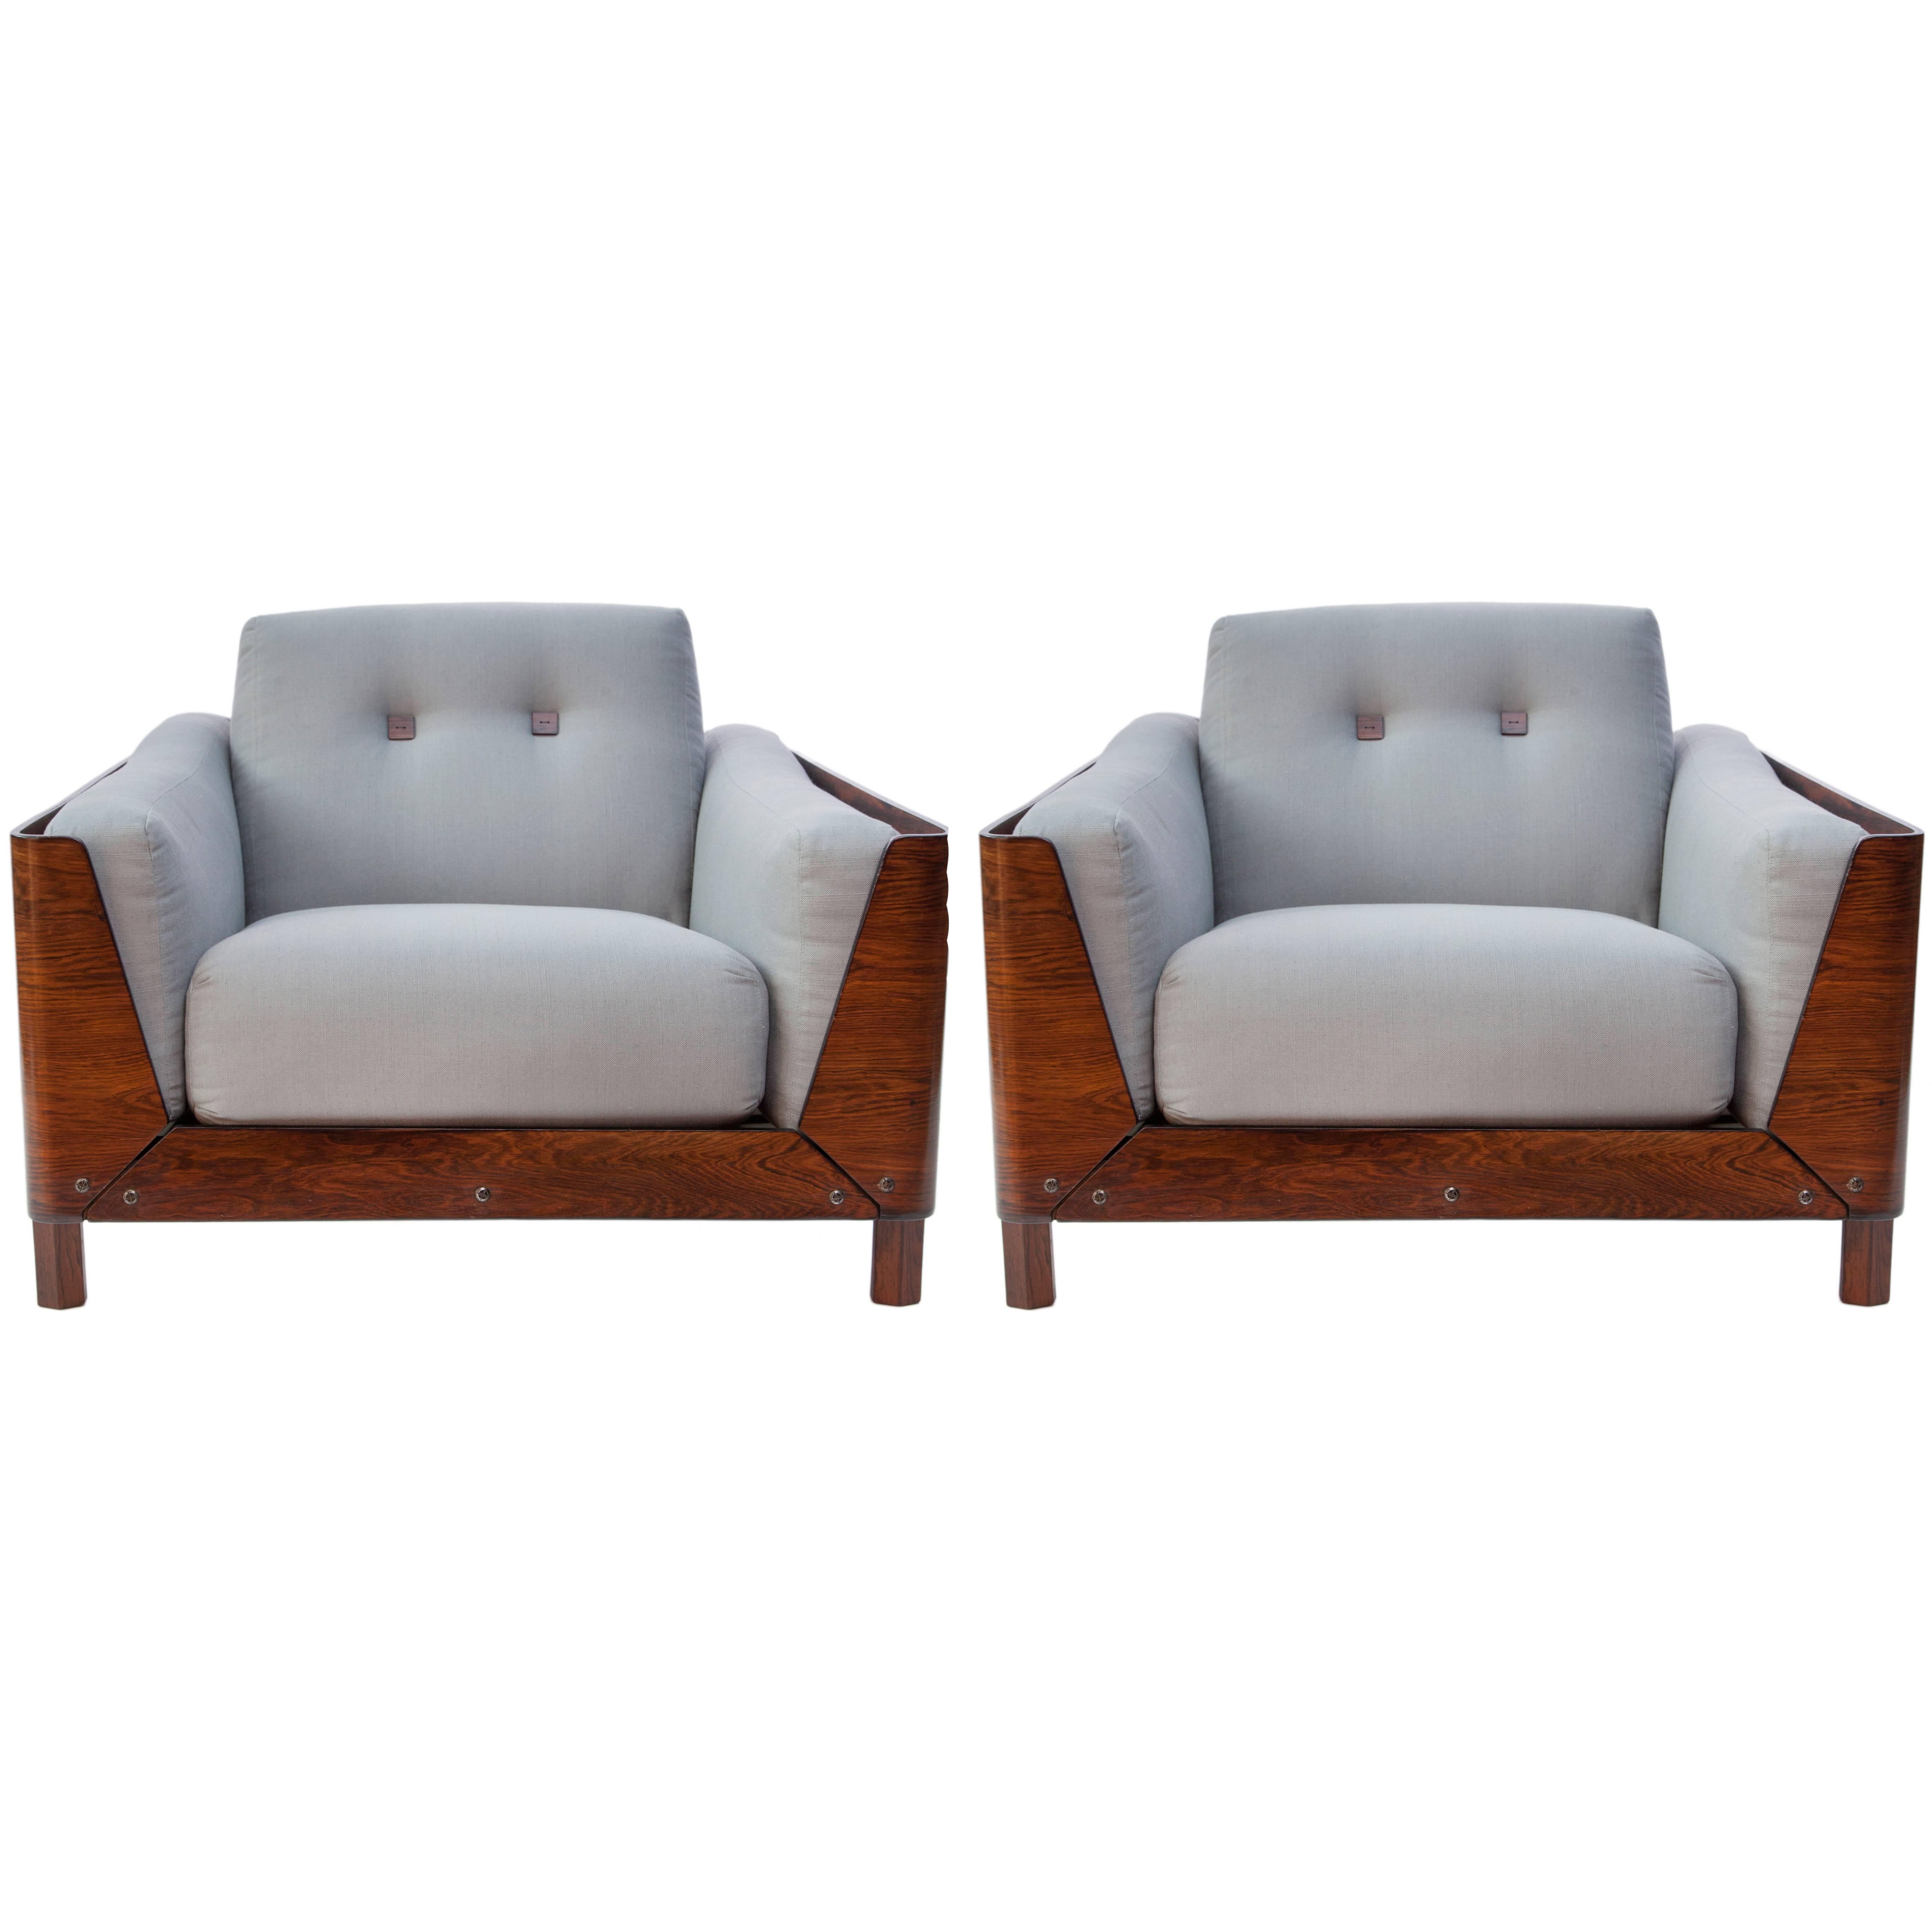 Pair of Armchairs Attributed to Jorge Zalszupin in Jacaranda and Grey Linen